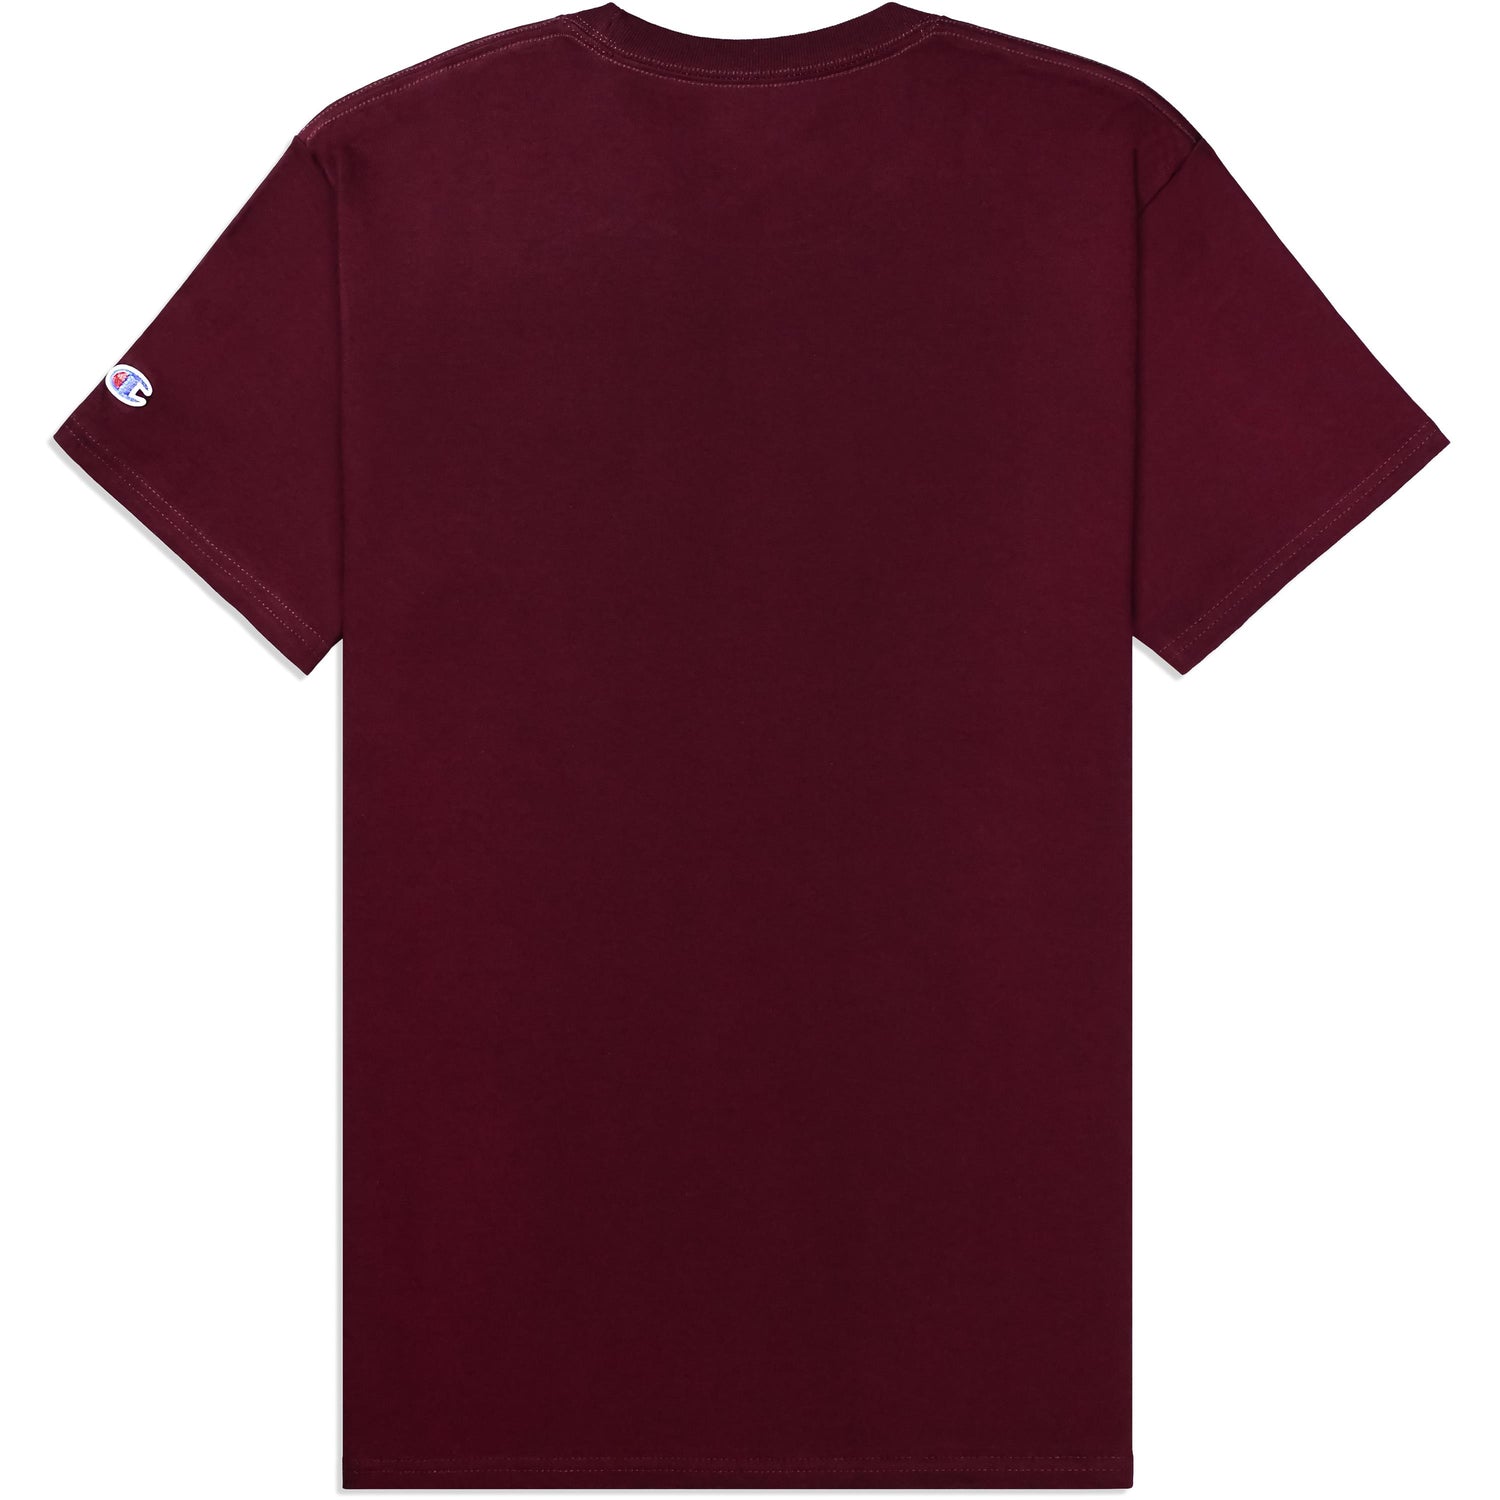 Texas A&M Champion College of Architecture T-Shirt